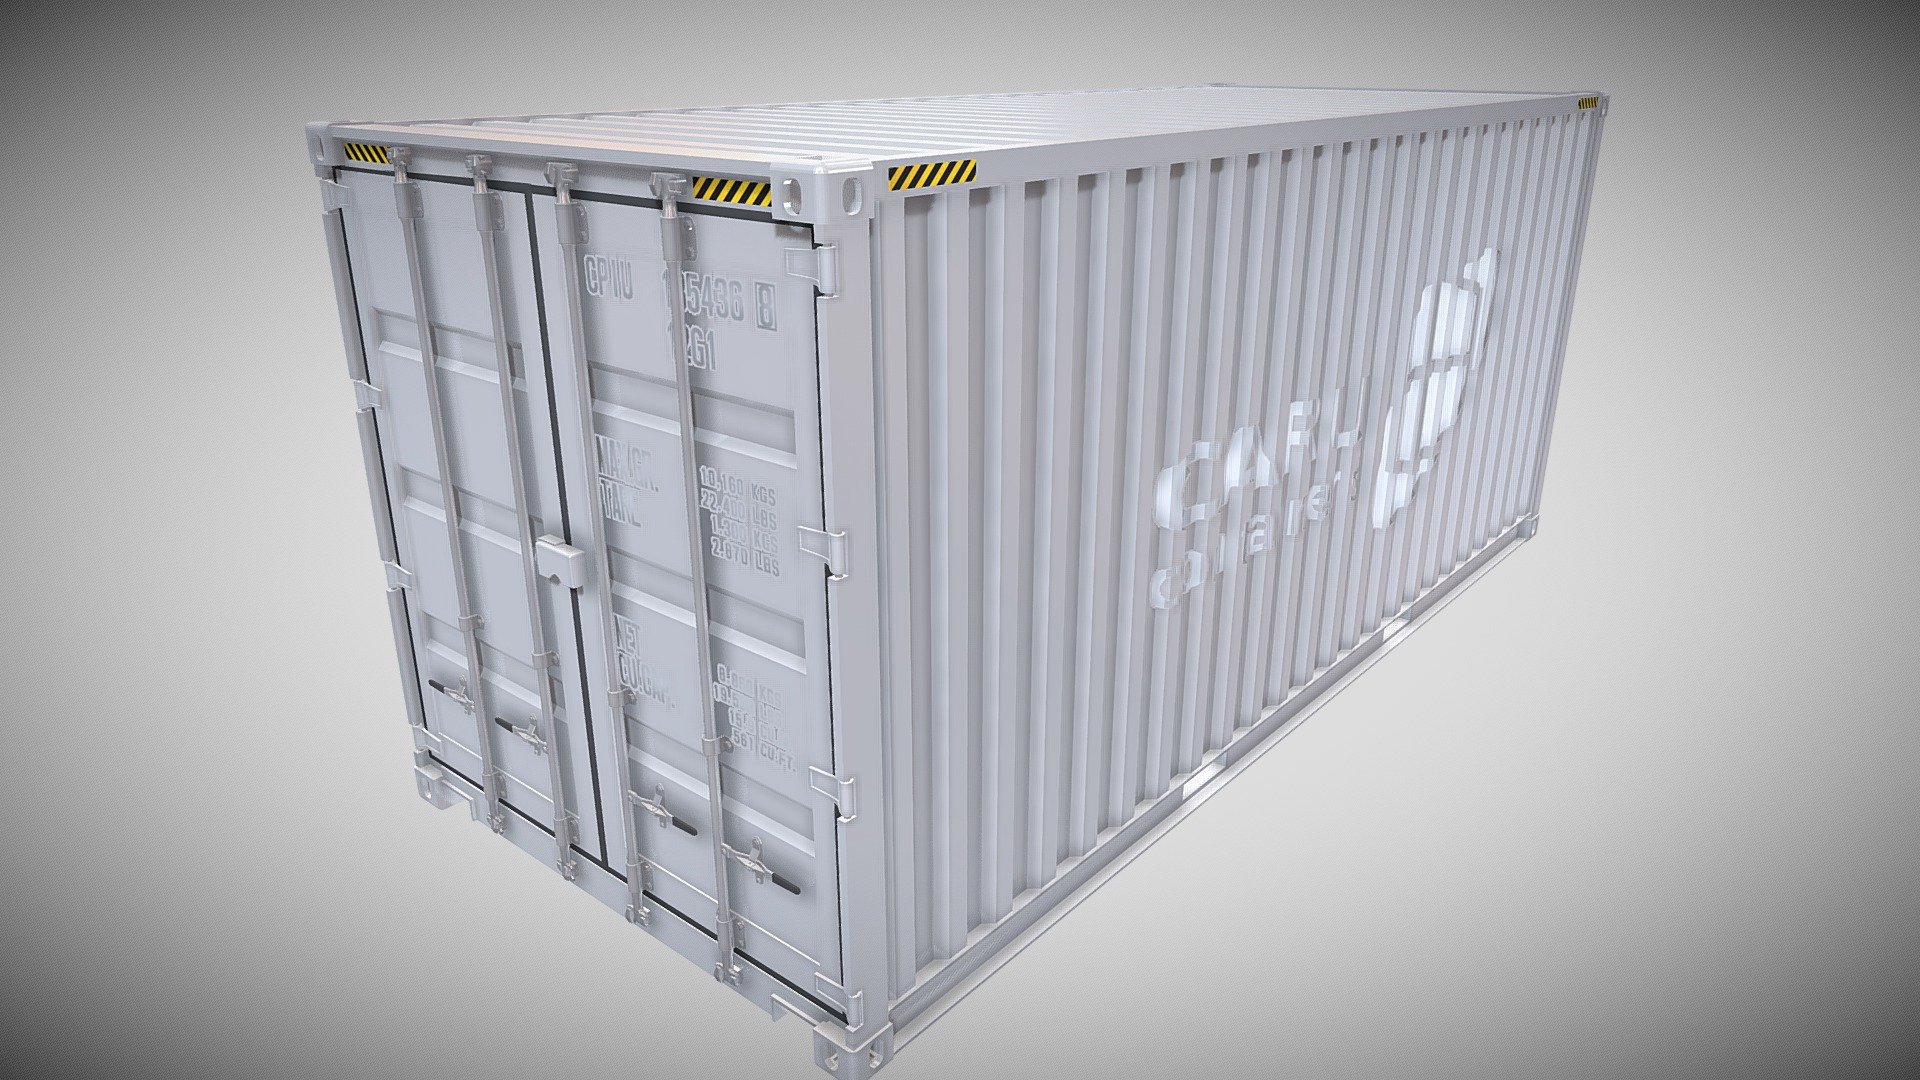 20ft Shipping Container 3d model rendered with Cycles in Blender, as per seen on attached images. 

File formats:
-.blend, rendered with cycles, as seen in the images;
-.obj, with materials applied;
-.dae, with materials applied;
-.fbx, with materials applied;
-.stl;

-.blend, with doors open, rendered with cycles, as seen in the images;
-.obj, with doors open, with materials applied;
-.dae, with doors open, with materials applied;
-.fbx, with doors open, with materials applied;
-.stl;

Files come named appropriately and split by file format.

3D Software:
The 3D model was originally created in Blender 2.8 and rendered with Cycles.

Materials and textures:
The models have materials applied in all formats, and are ready to import and render.
The model comes with two png image textures 3d model